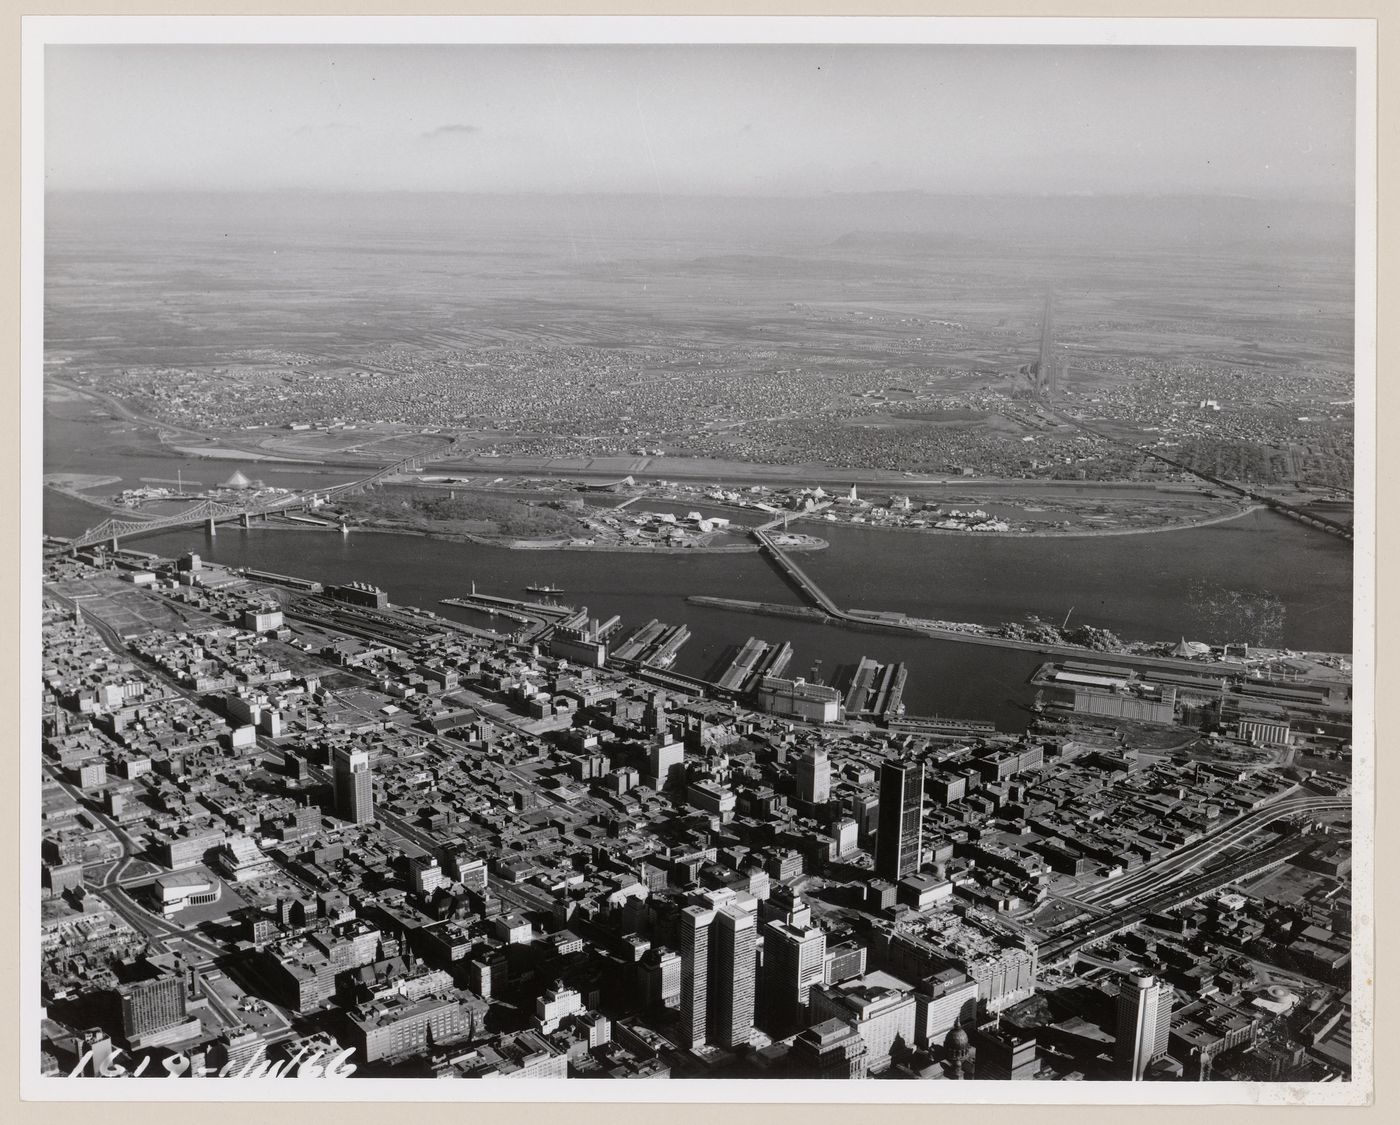 Aerial view of the exhibition sites with Montréal in foreground and the South Shore in background, Expo 67, Montréal, Québec